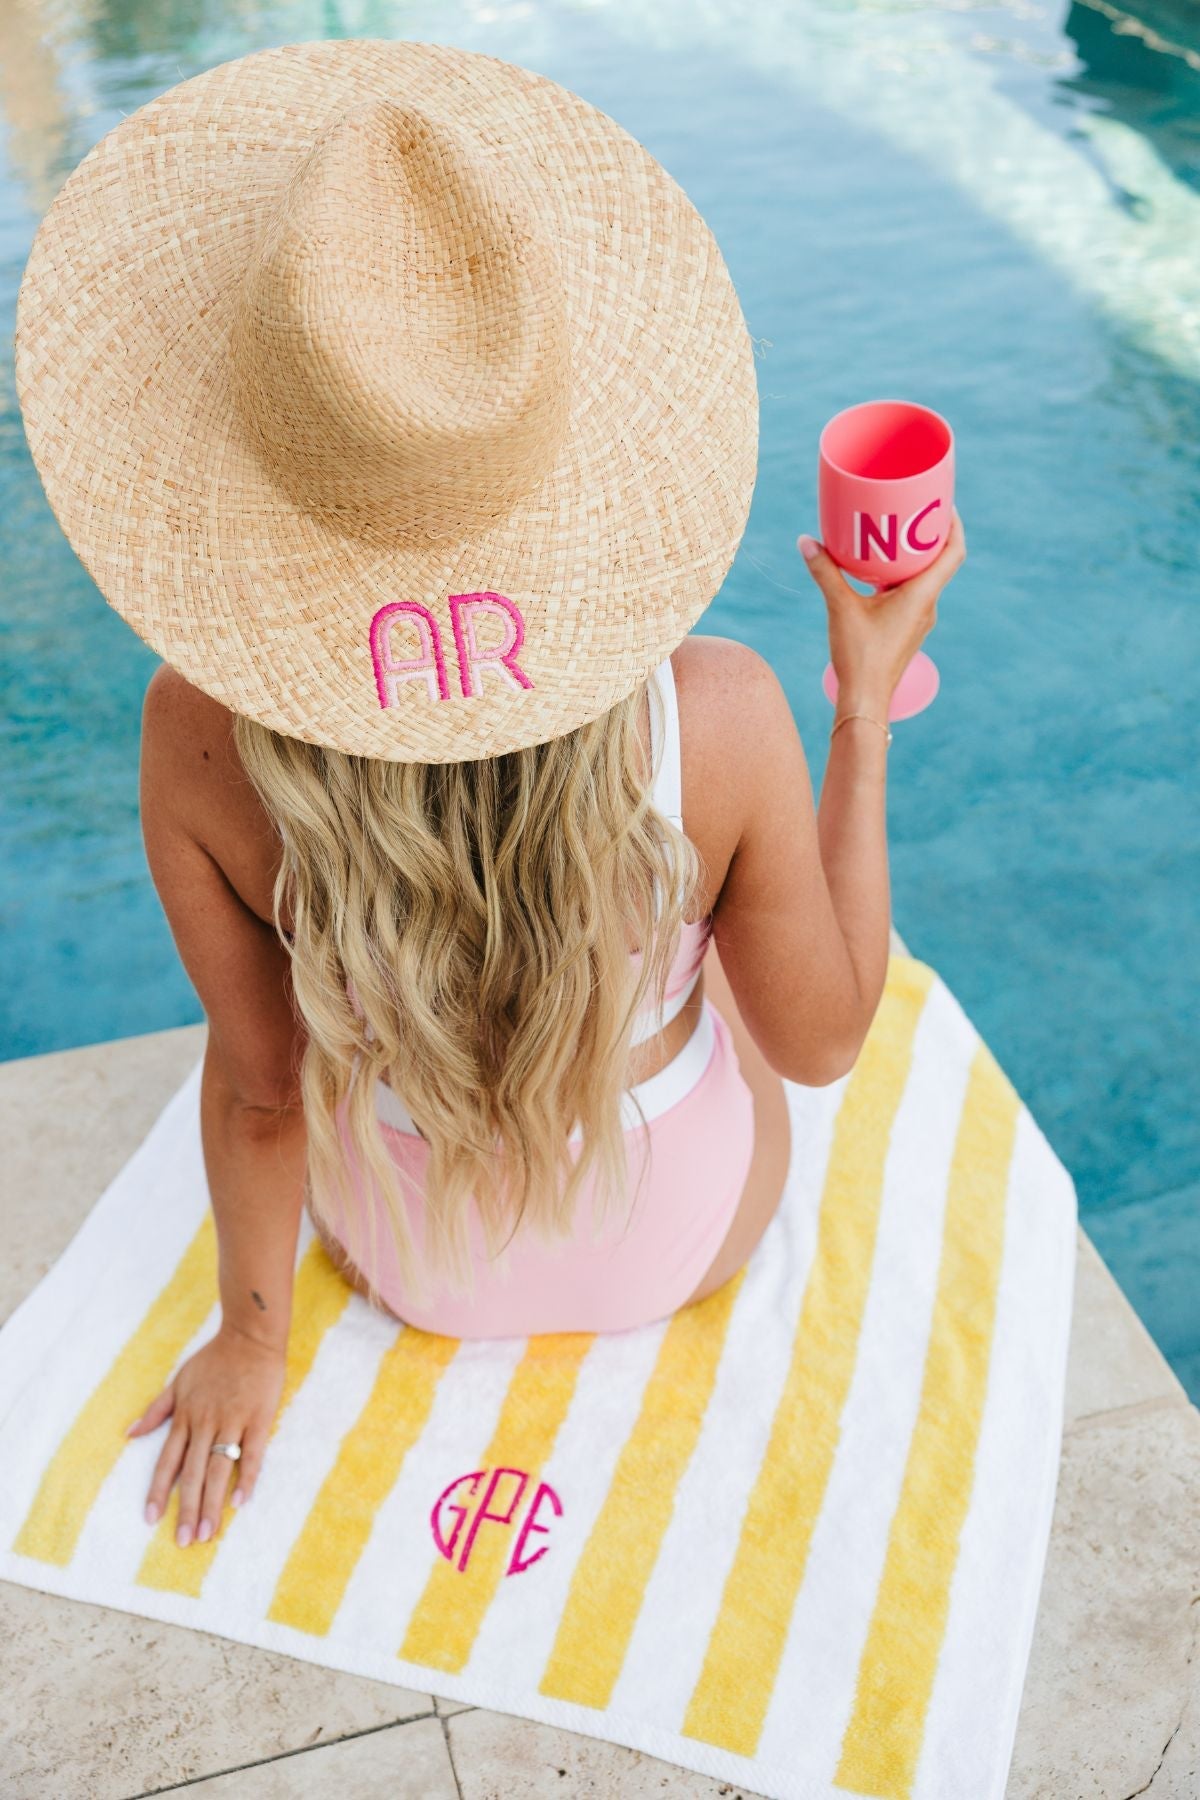 A straw beach hat with "MC" embroidered on the brim